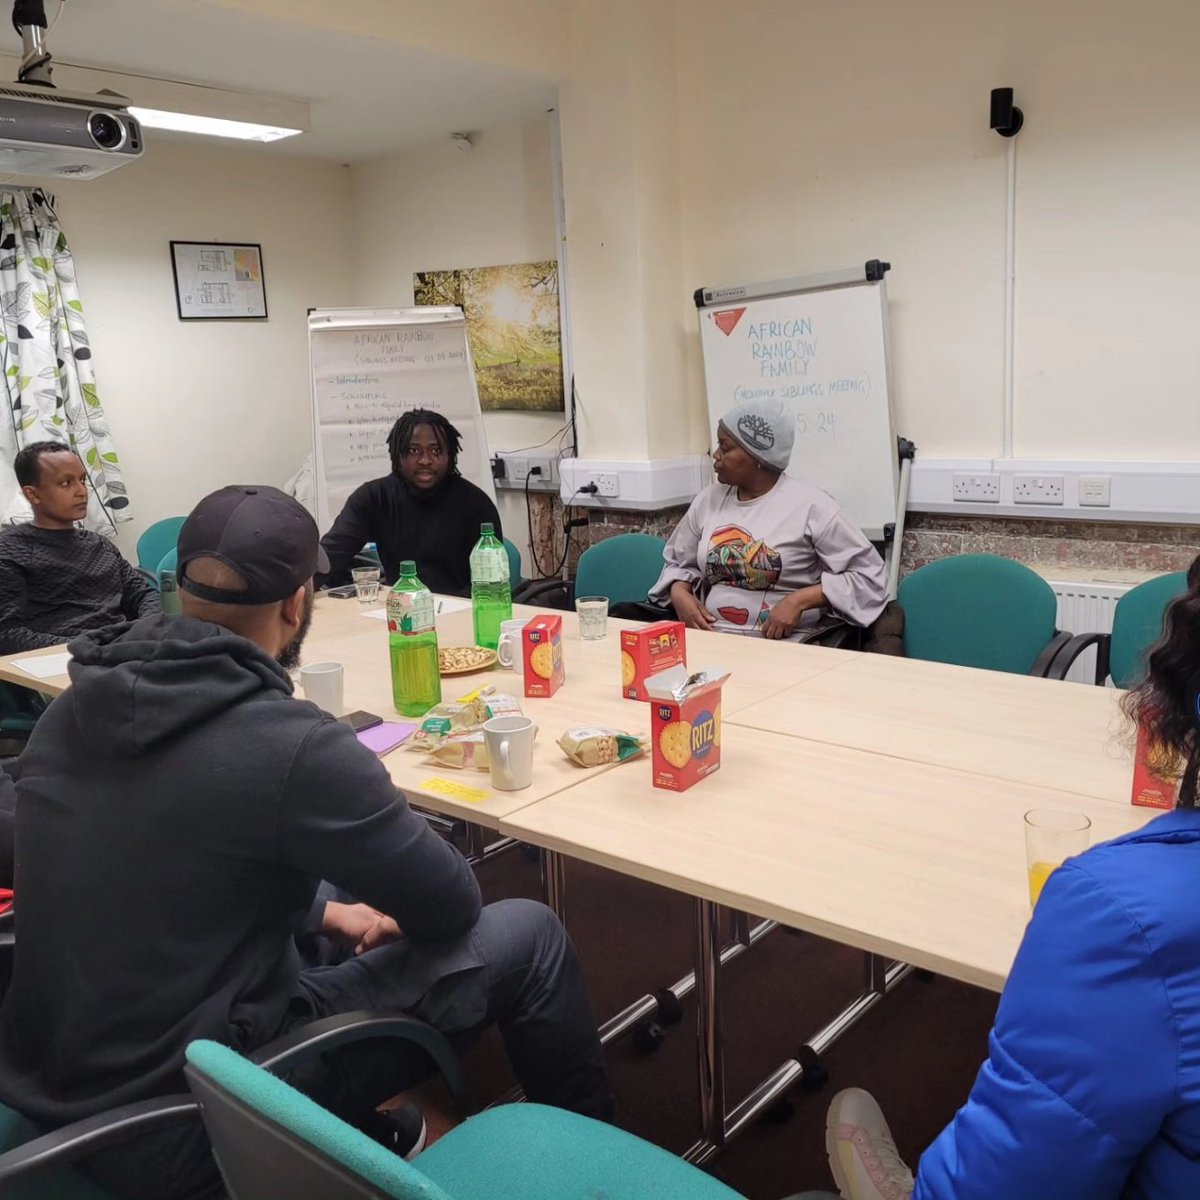 Our May sibling meeting in Birmingham was a wonderful time 🌈 It is always so inspiring to listen to the expertise and knowledge of our service users, we love watching one another flourish 🏳️‍🌈🏳️‍⚧️ See you all next month! ❤️ #lgbtiq #peopleseekingasylum #asylum #refugee #werehere